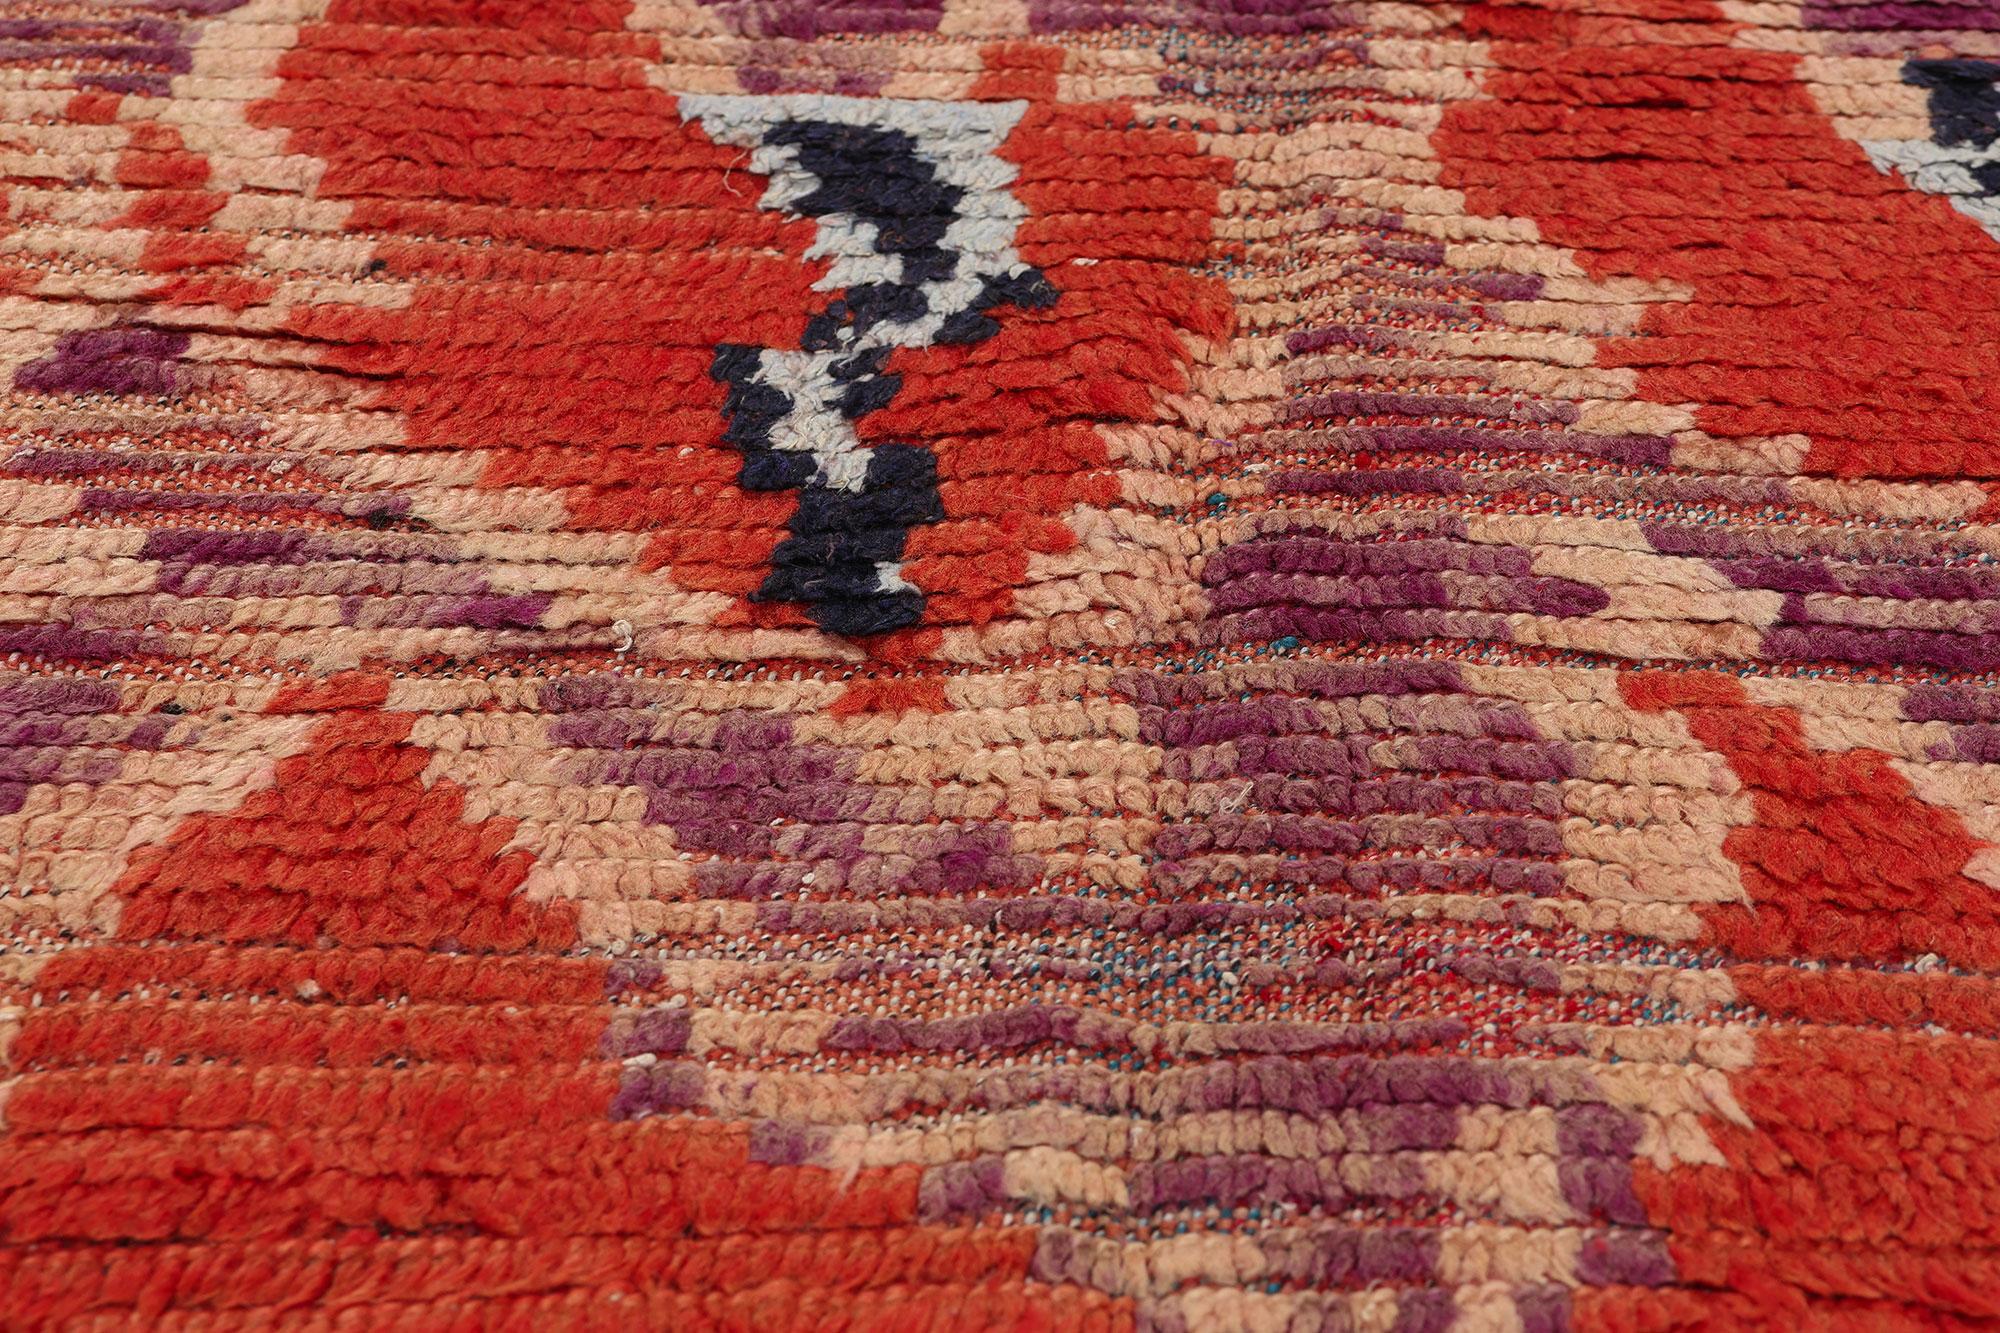 Vintage Berber Red Moroccan Azilal Rug, Boho Chic Meets Cozy Tribal Enchantment In Good Condition For Sale In Dallas, TX